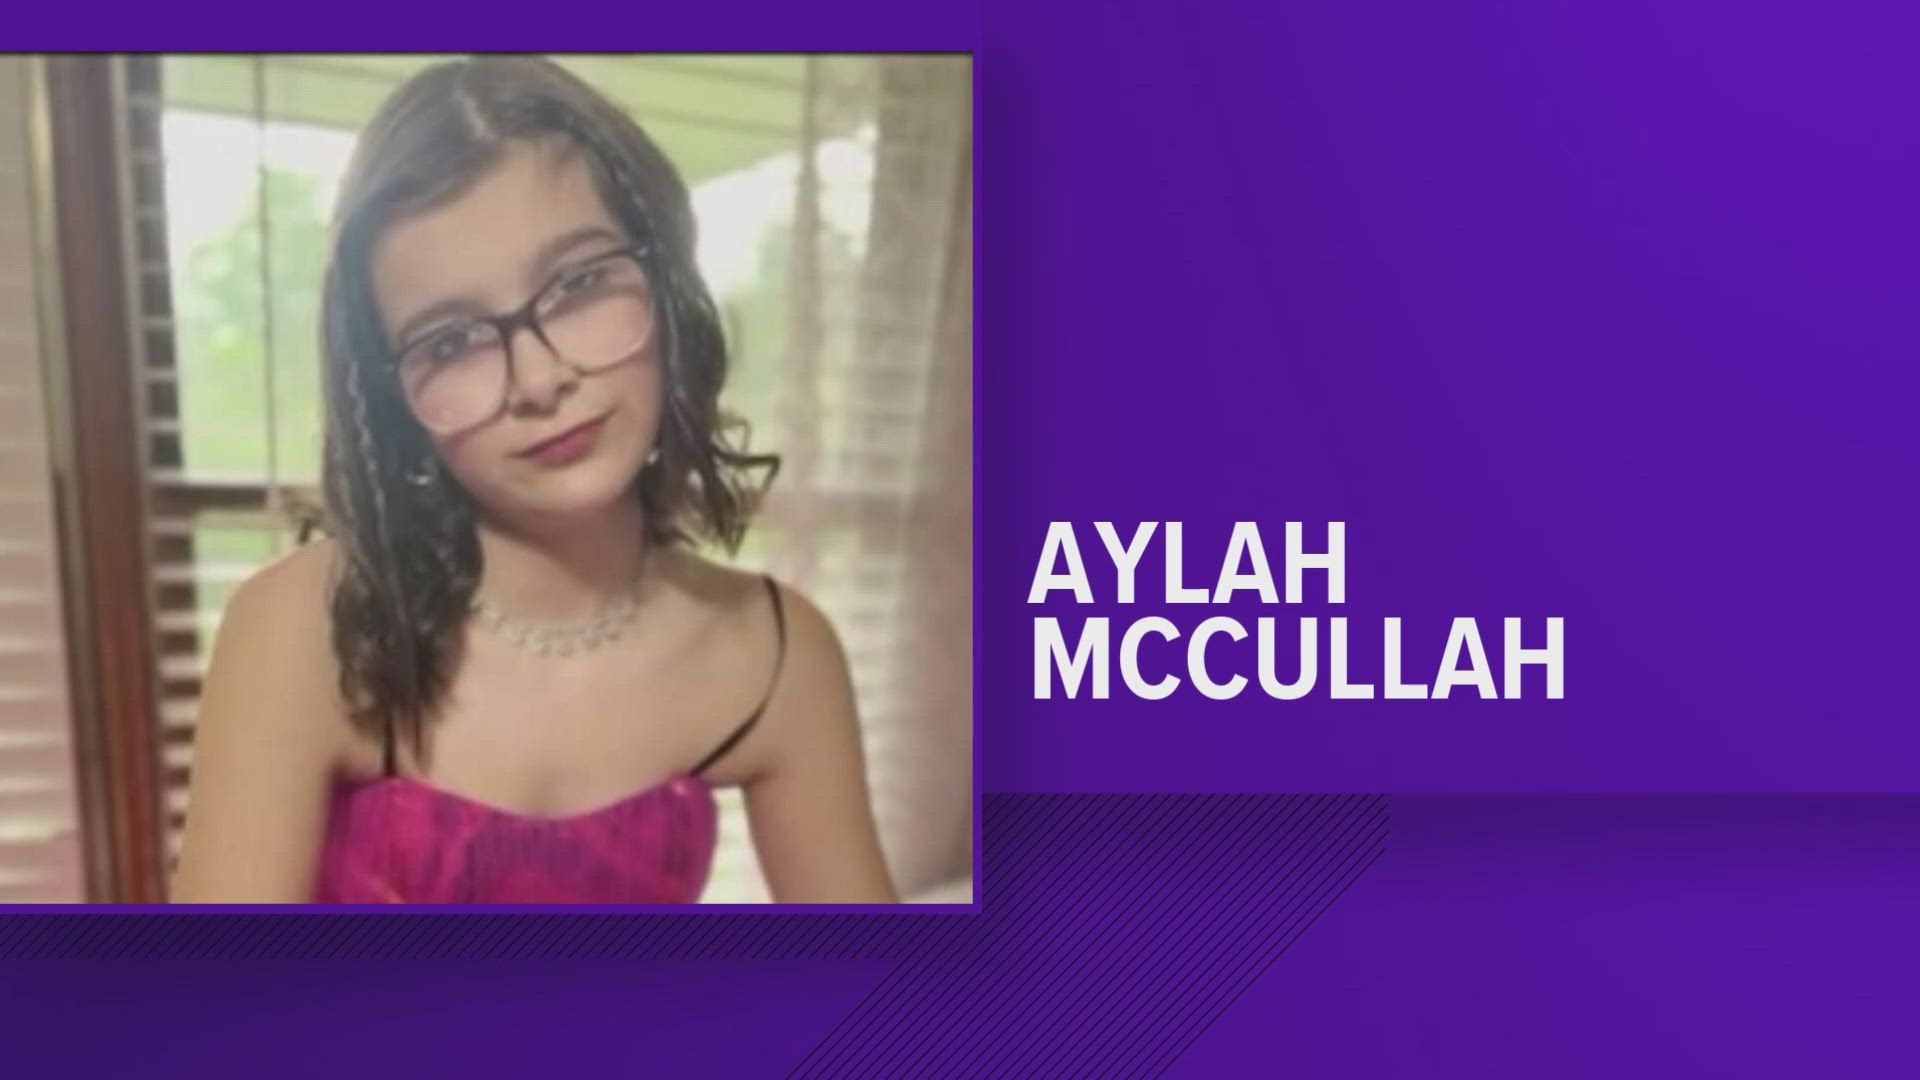 Aylah McCullah was last seen wearing a pink shirt, tan jacket and black Converse shoes, the Campbell County Sherriff's Office said.